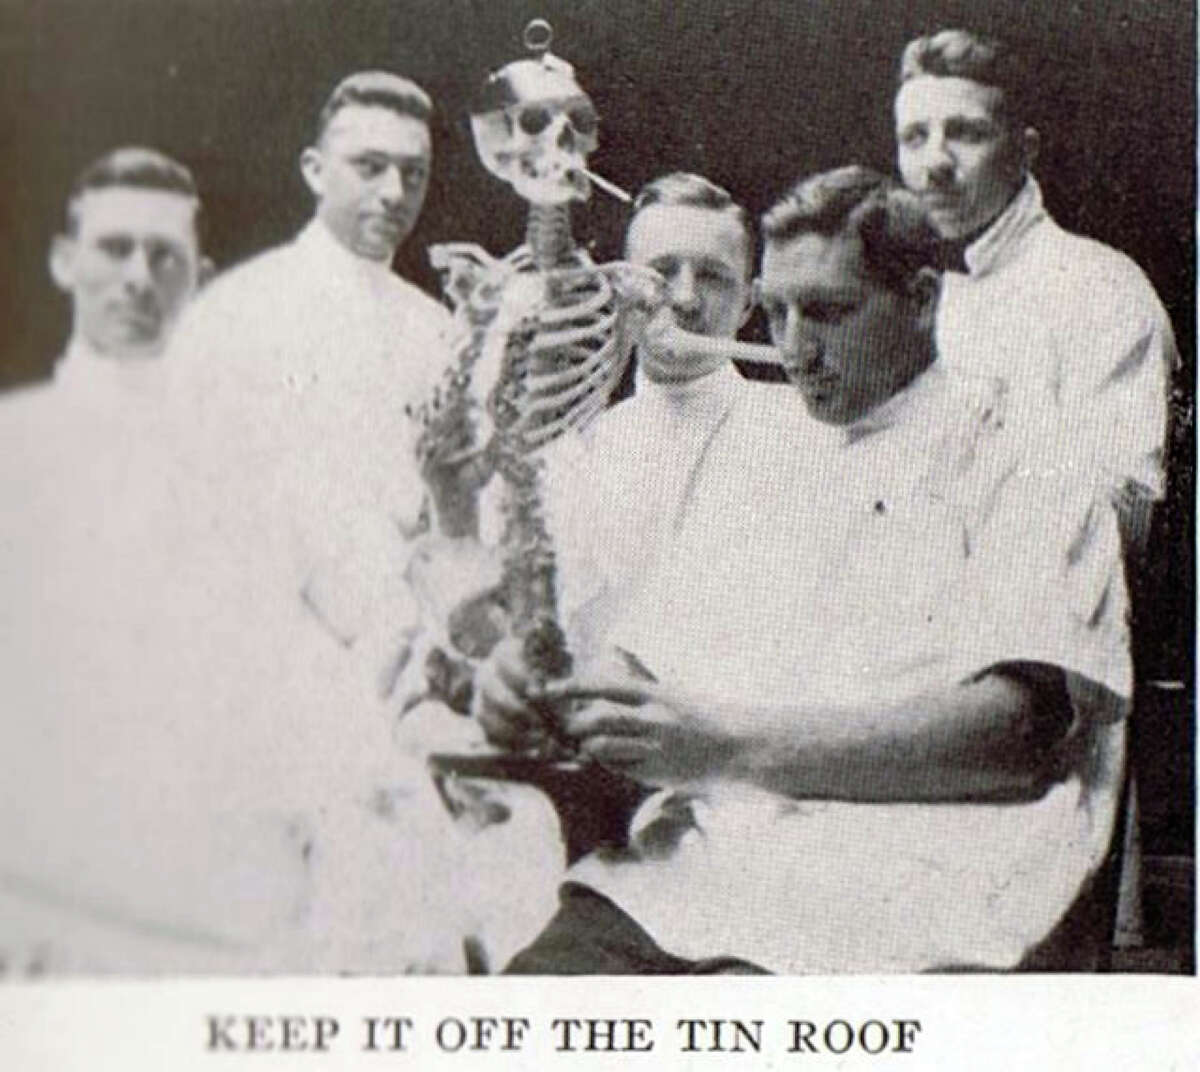 "Keep it off the tin roof", a cryptic, amusing look at U.C. Berkeley campus life, from the Blue and Gold 1918. From the collection of Bob Bragman.